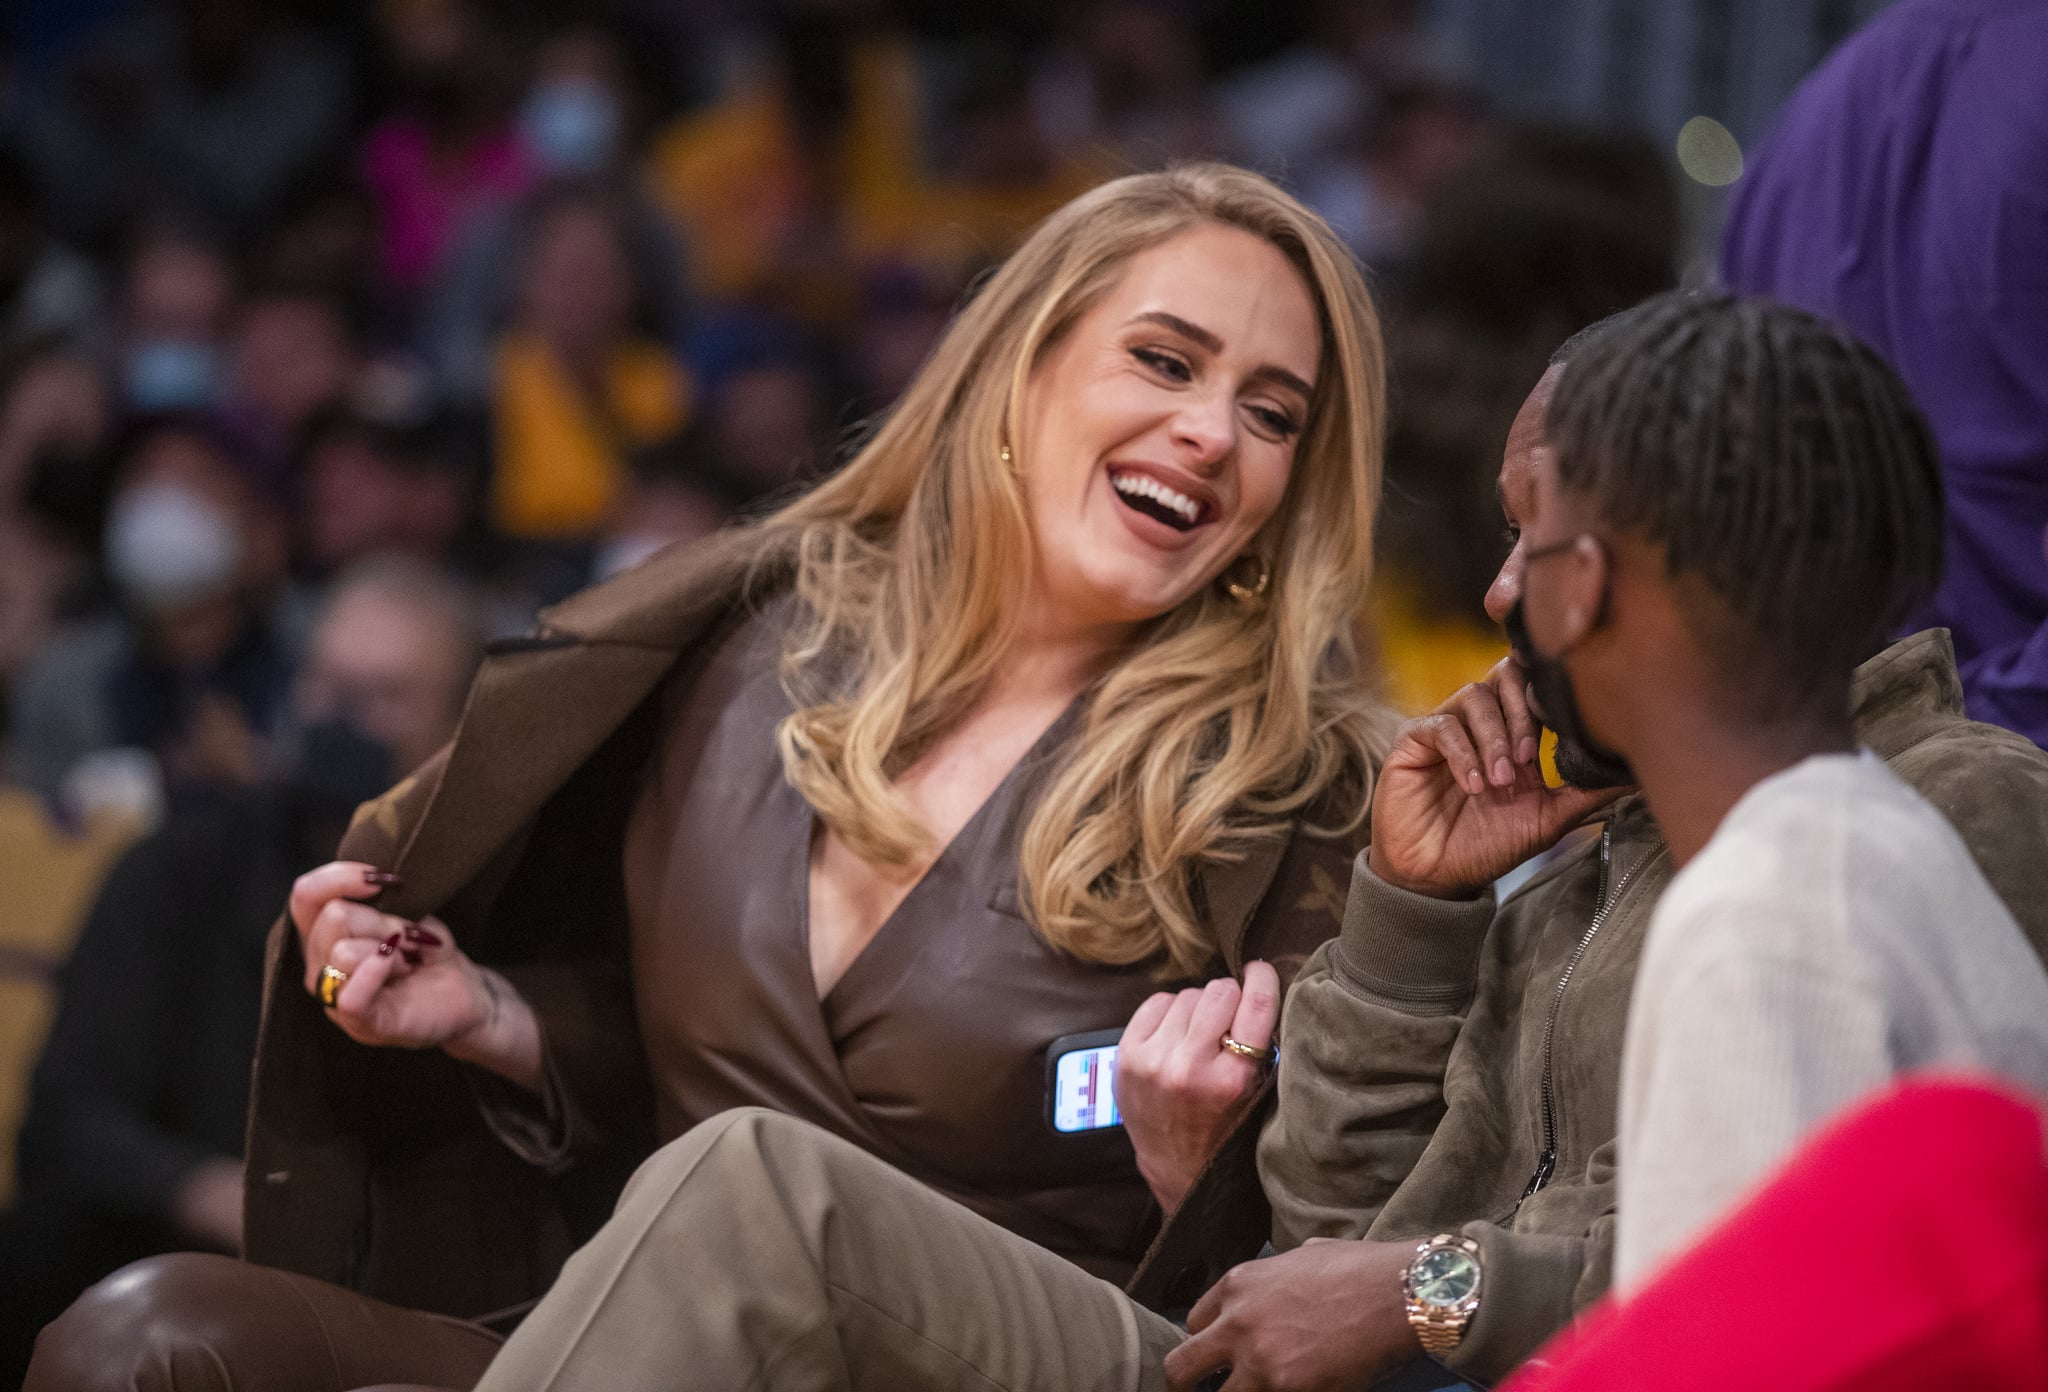 Adele Nailed Courtside Fashion In A Leather Outfit & Louis Vuitton Coat